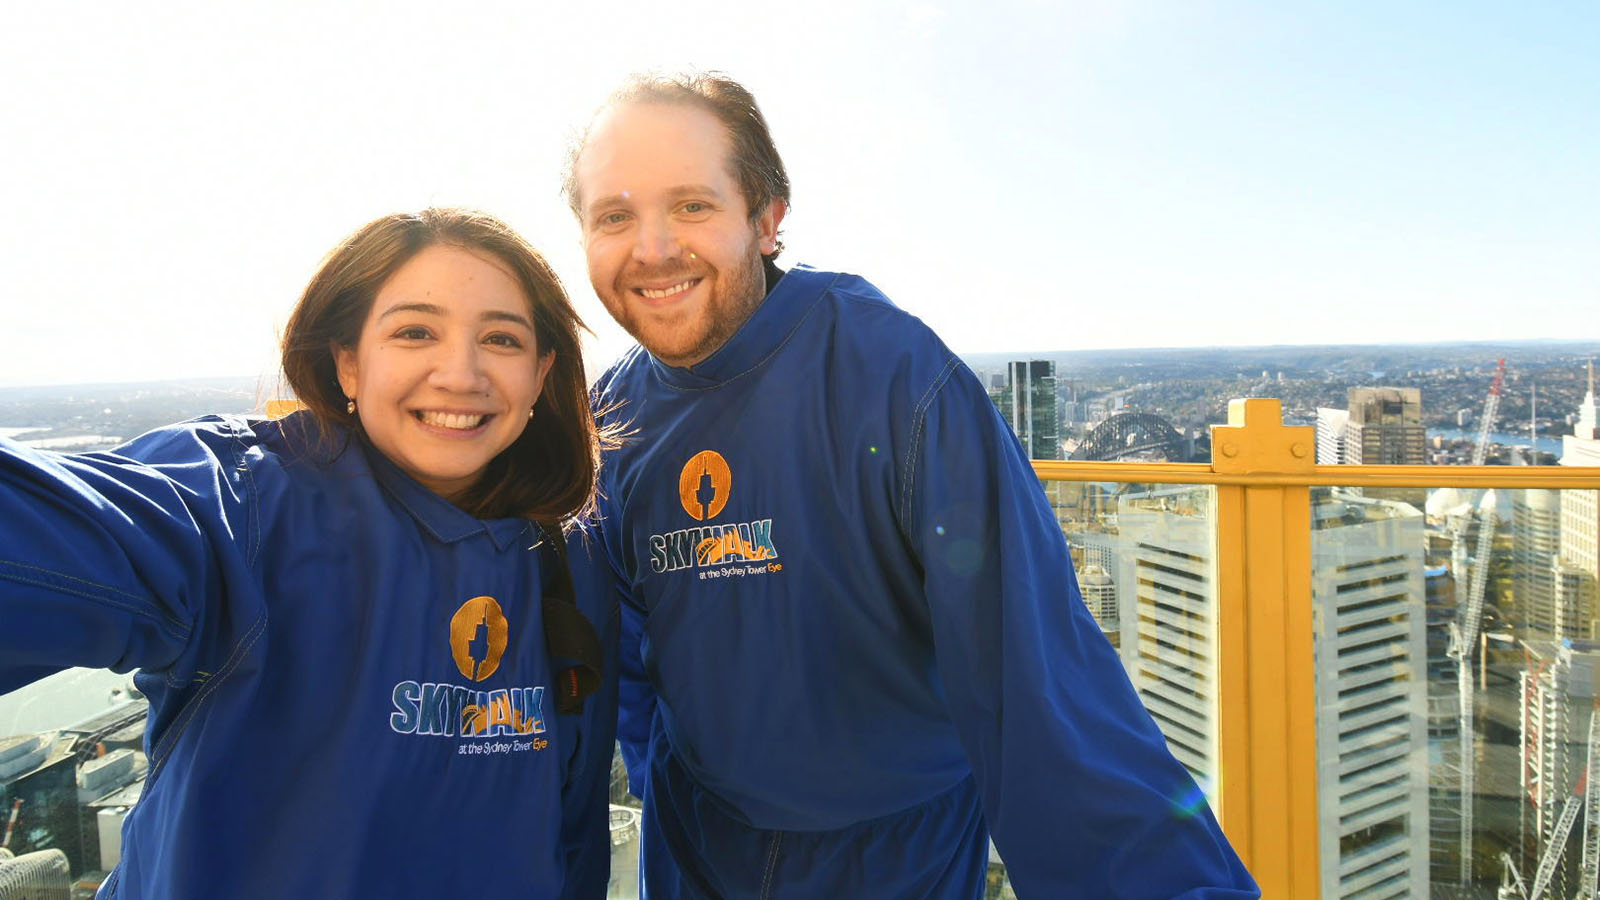 Chris Chamberlin and Victoria Kyriakopoulos at the Sydney Tower